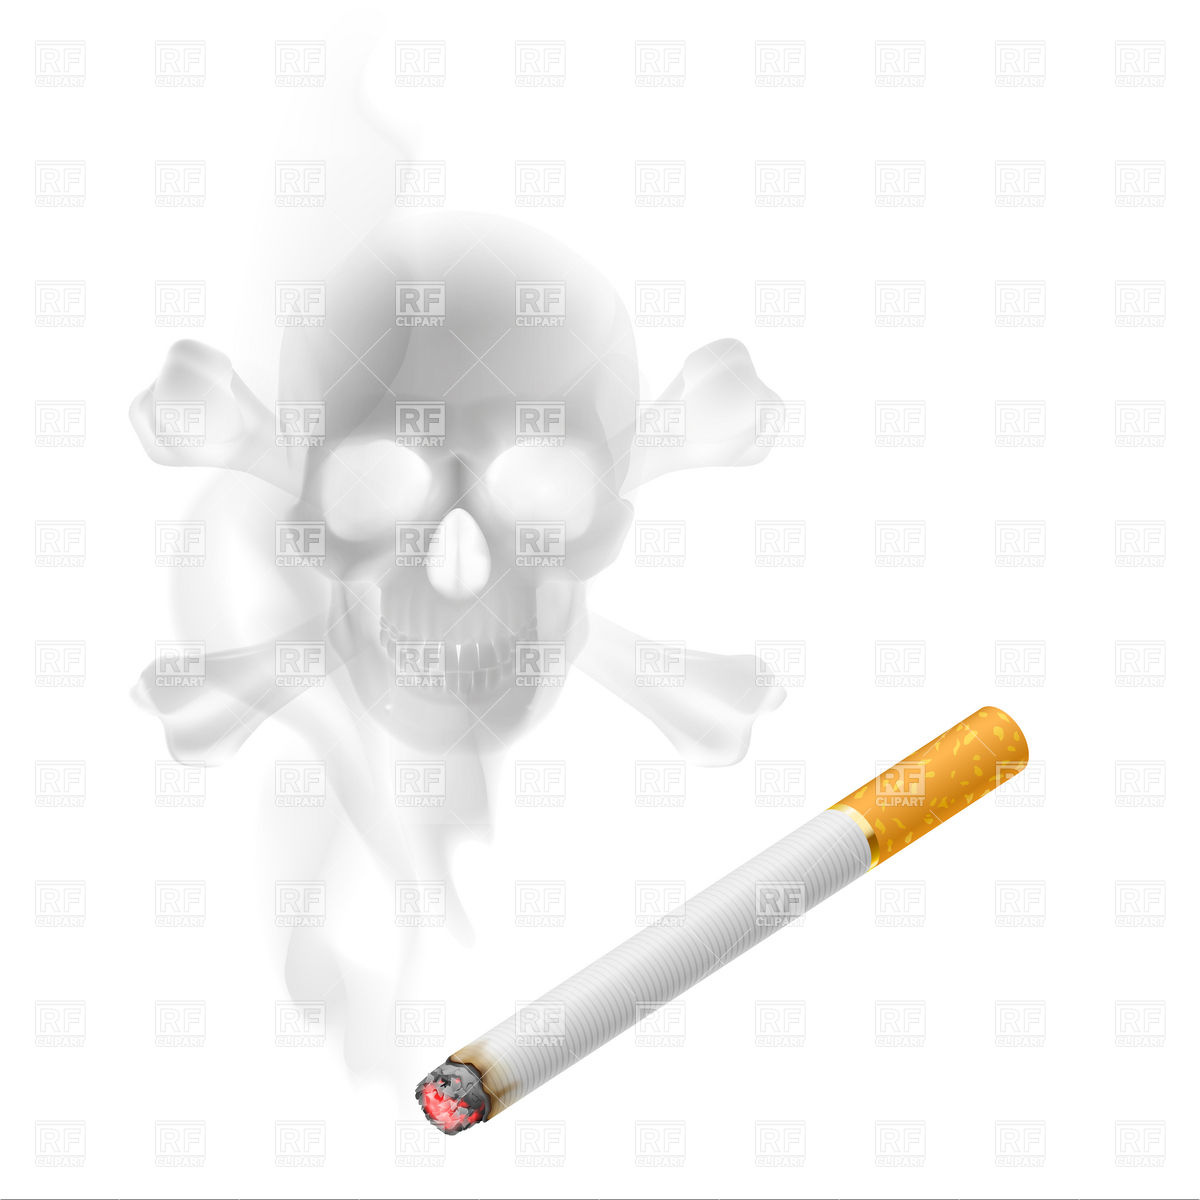 Cigarette And Skull Of Smoke Download Royalty Free Vector Clipart